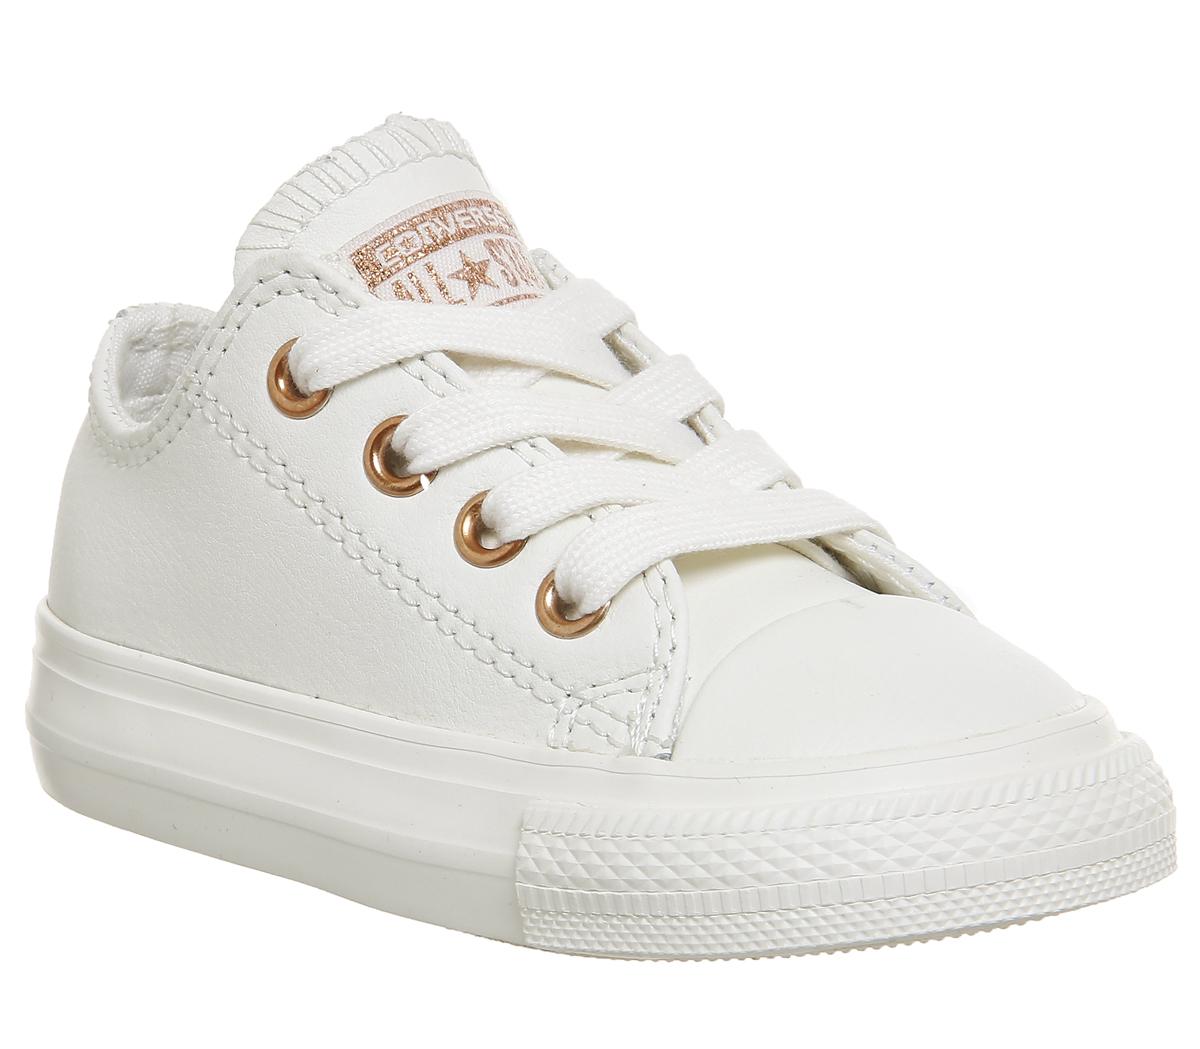 converse white leather rose gold